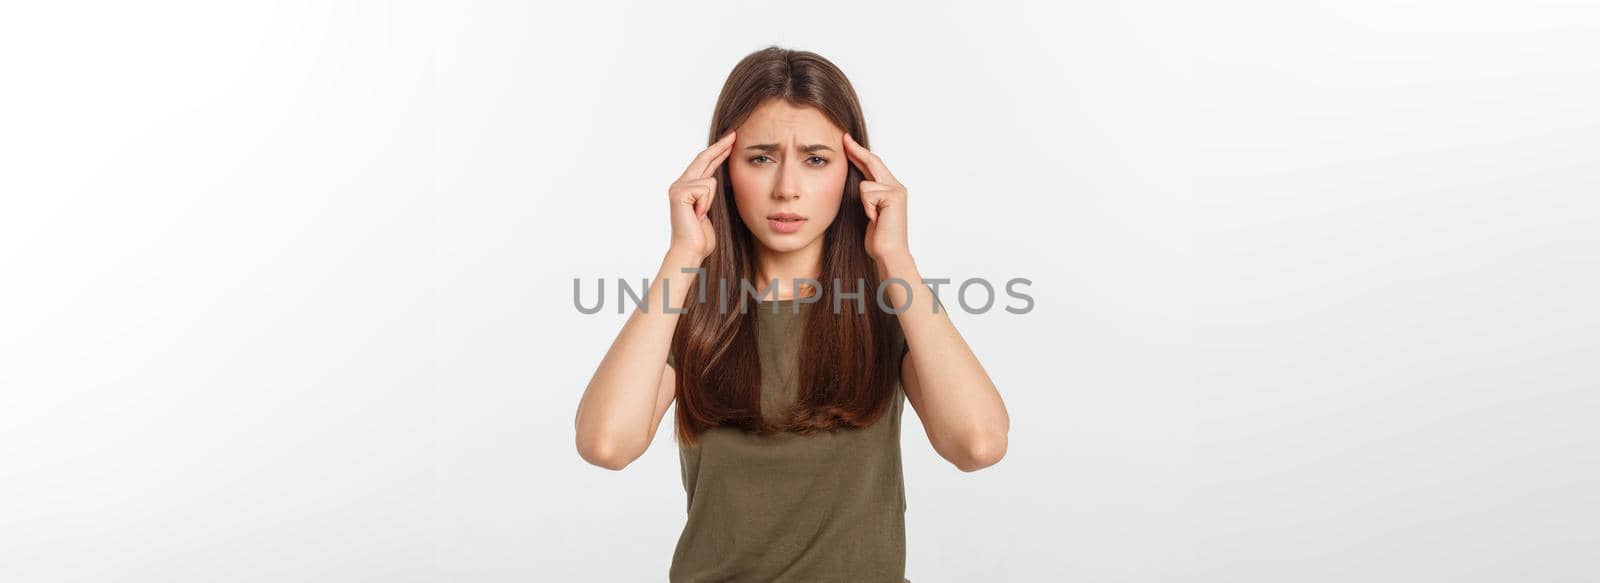 A young attractive woman suffering from illness or headache holding her head. Isolated on white.